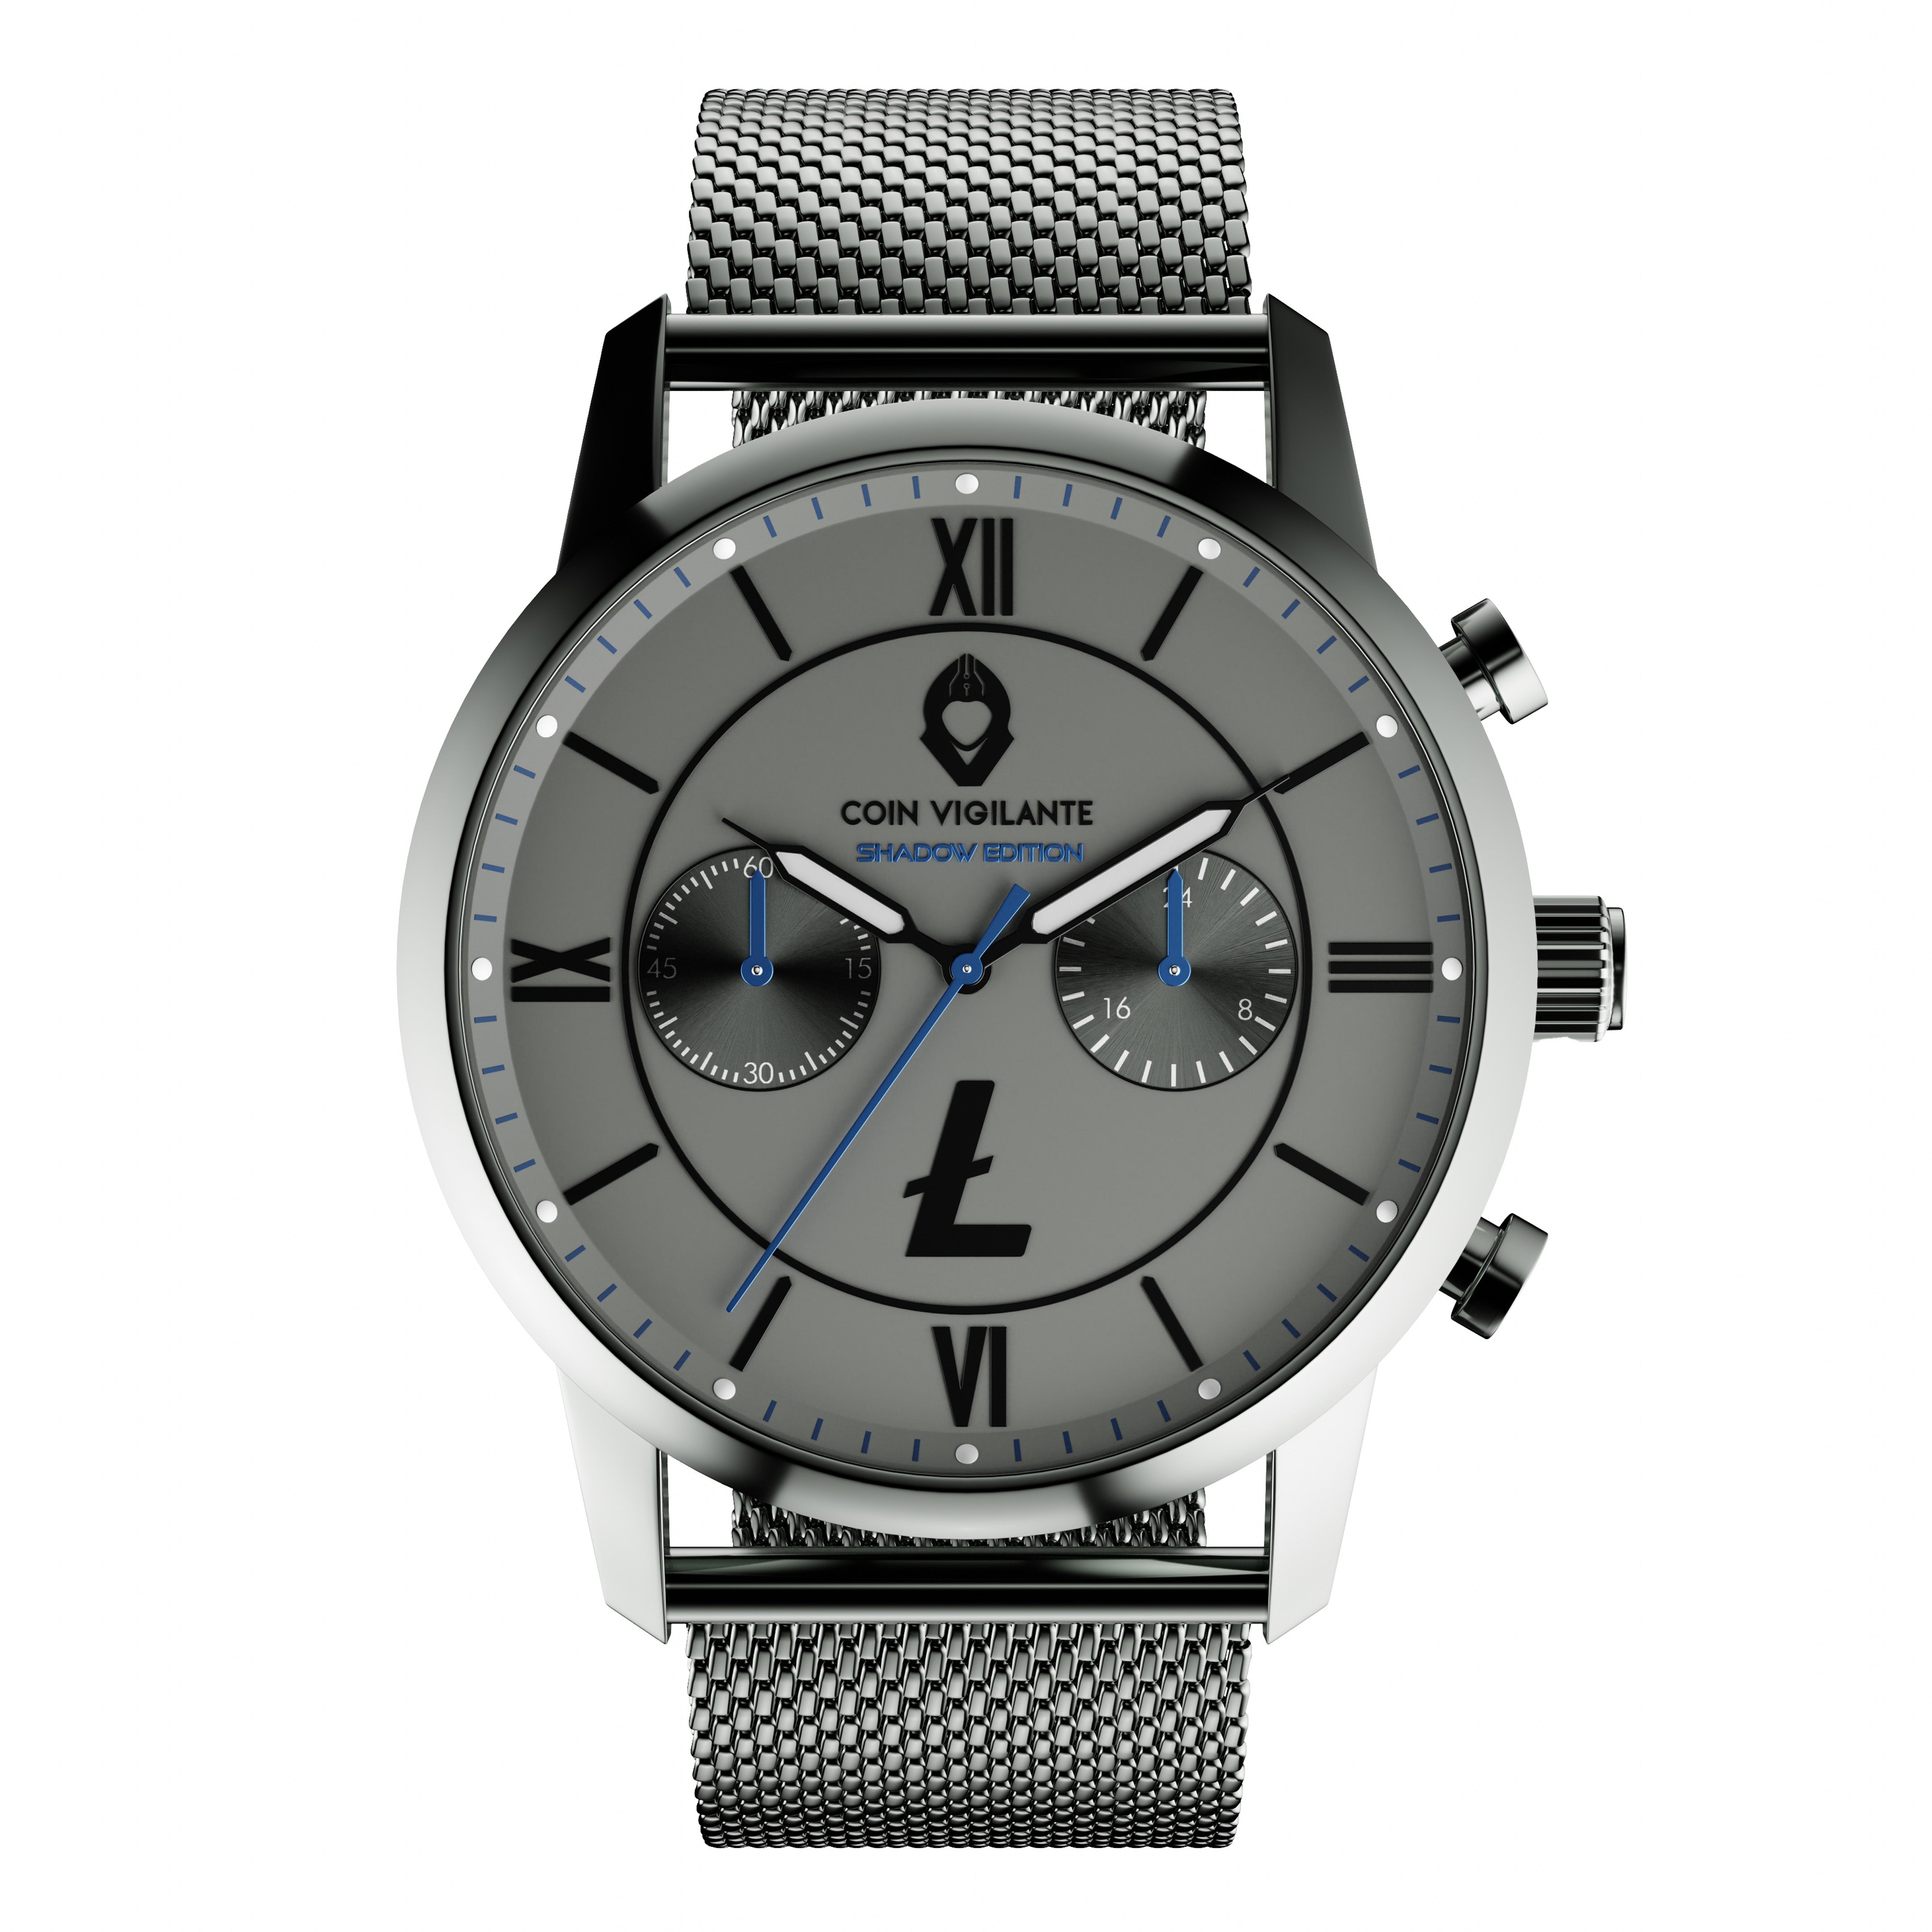 Coin Vigilante's Shadow Edition Litecoin Watch - elegant timepiece with gunmetal case and blue accents.